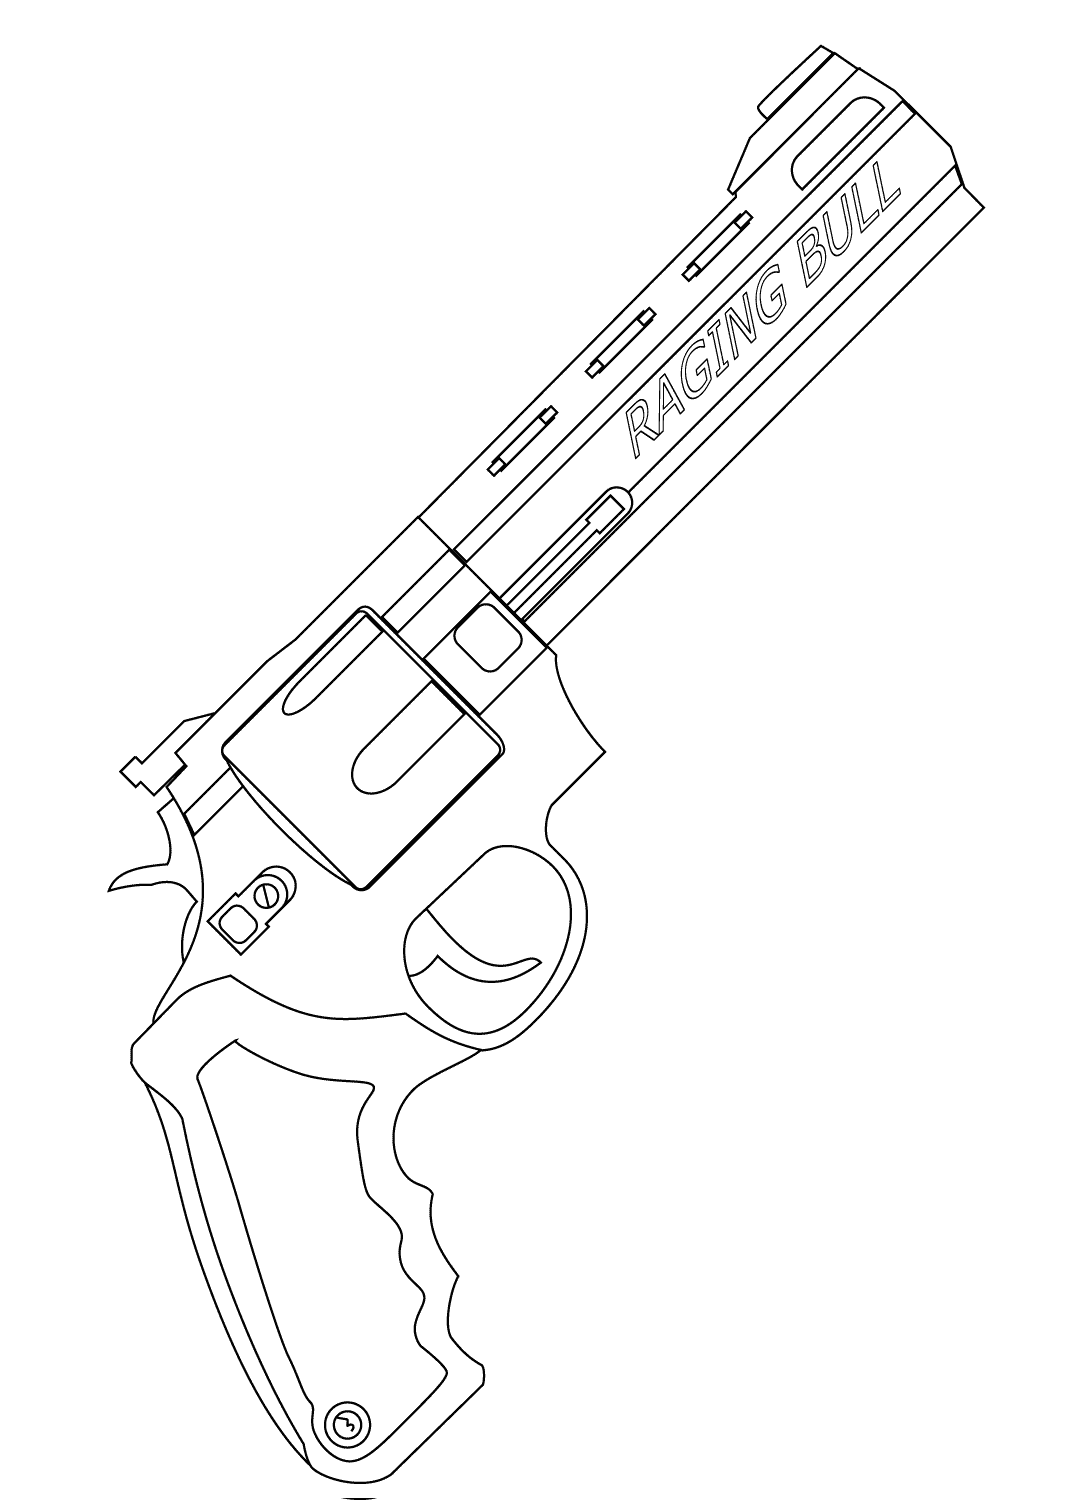 Pistol coloring pages to download and print for free